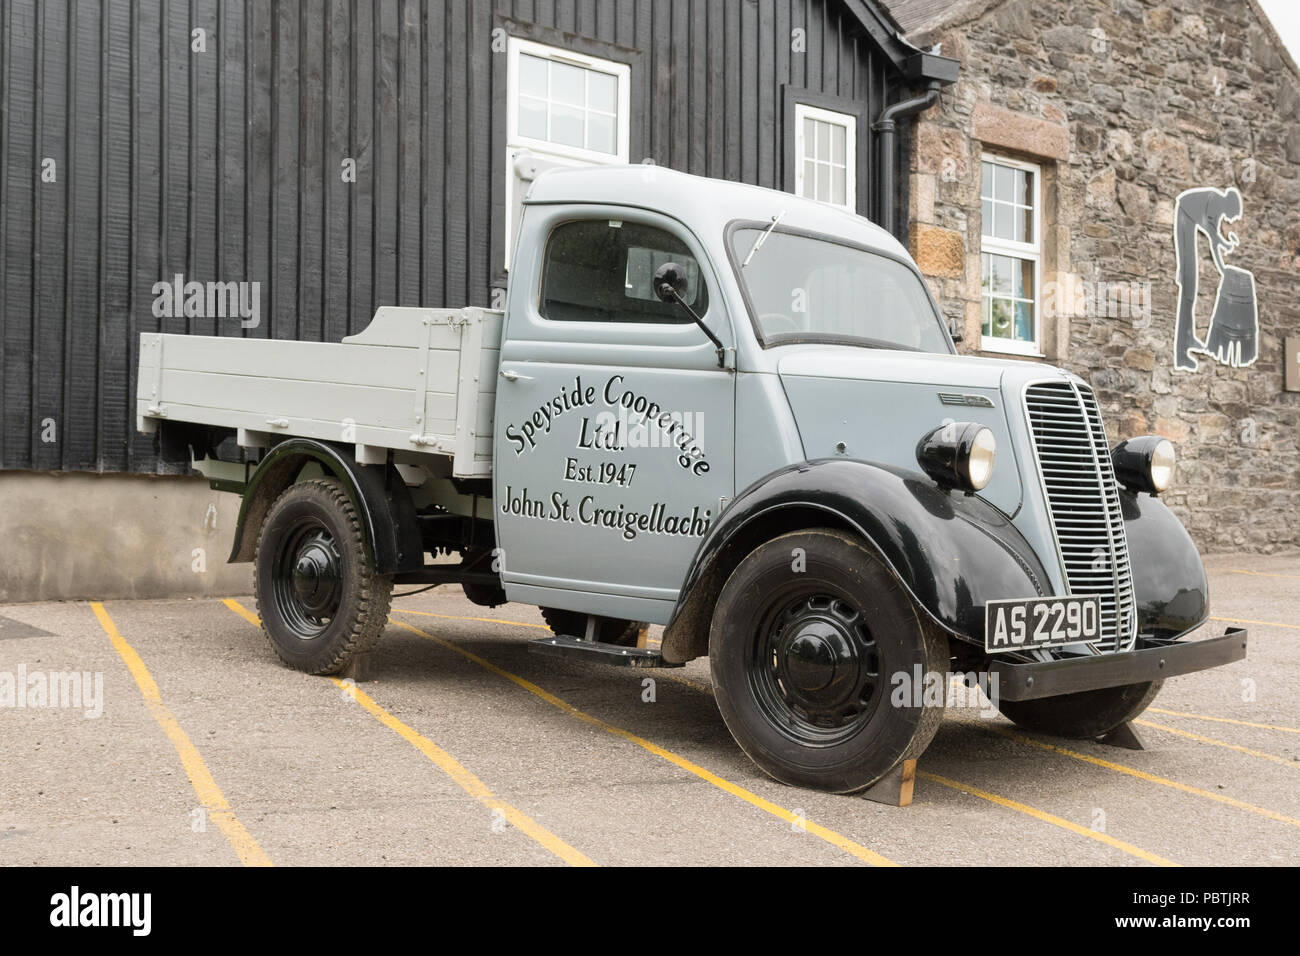 Fordson E83W pick up truck à Speyside Cooperage, Ecosse, Royaume-Uni Banque D'Images